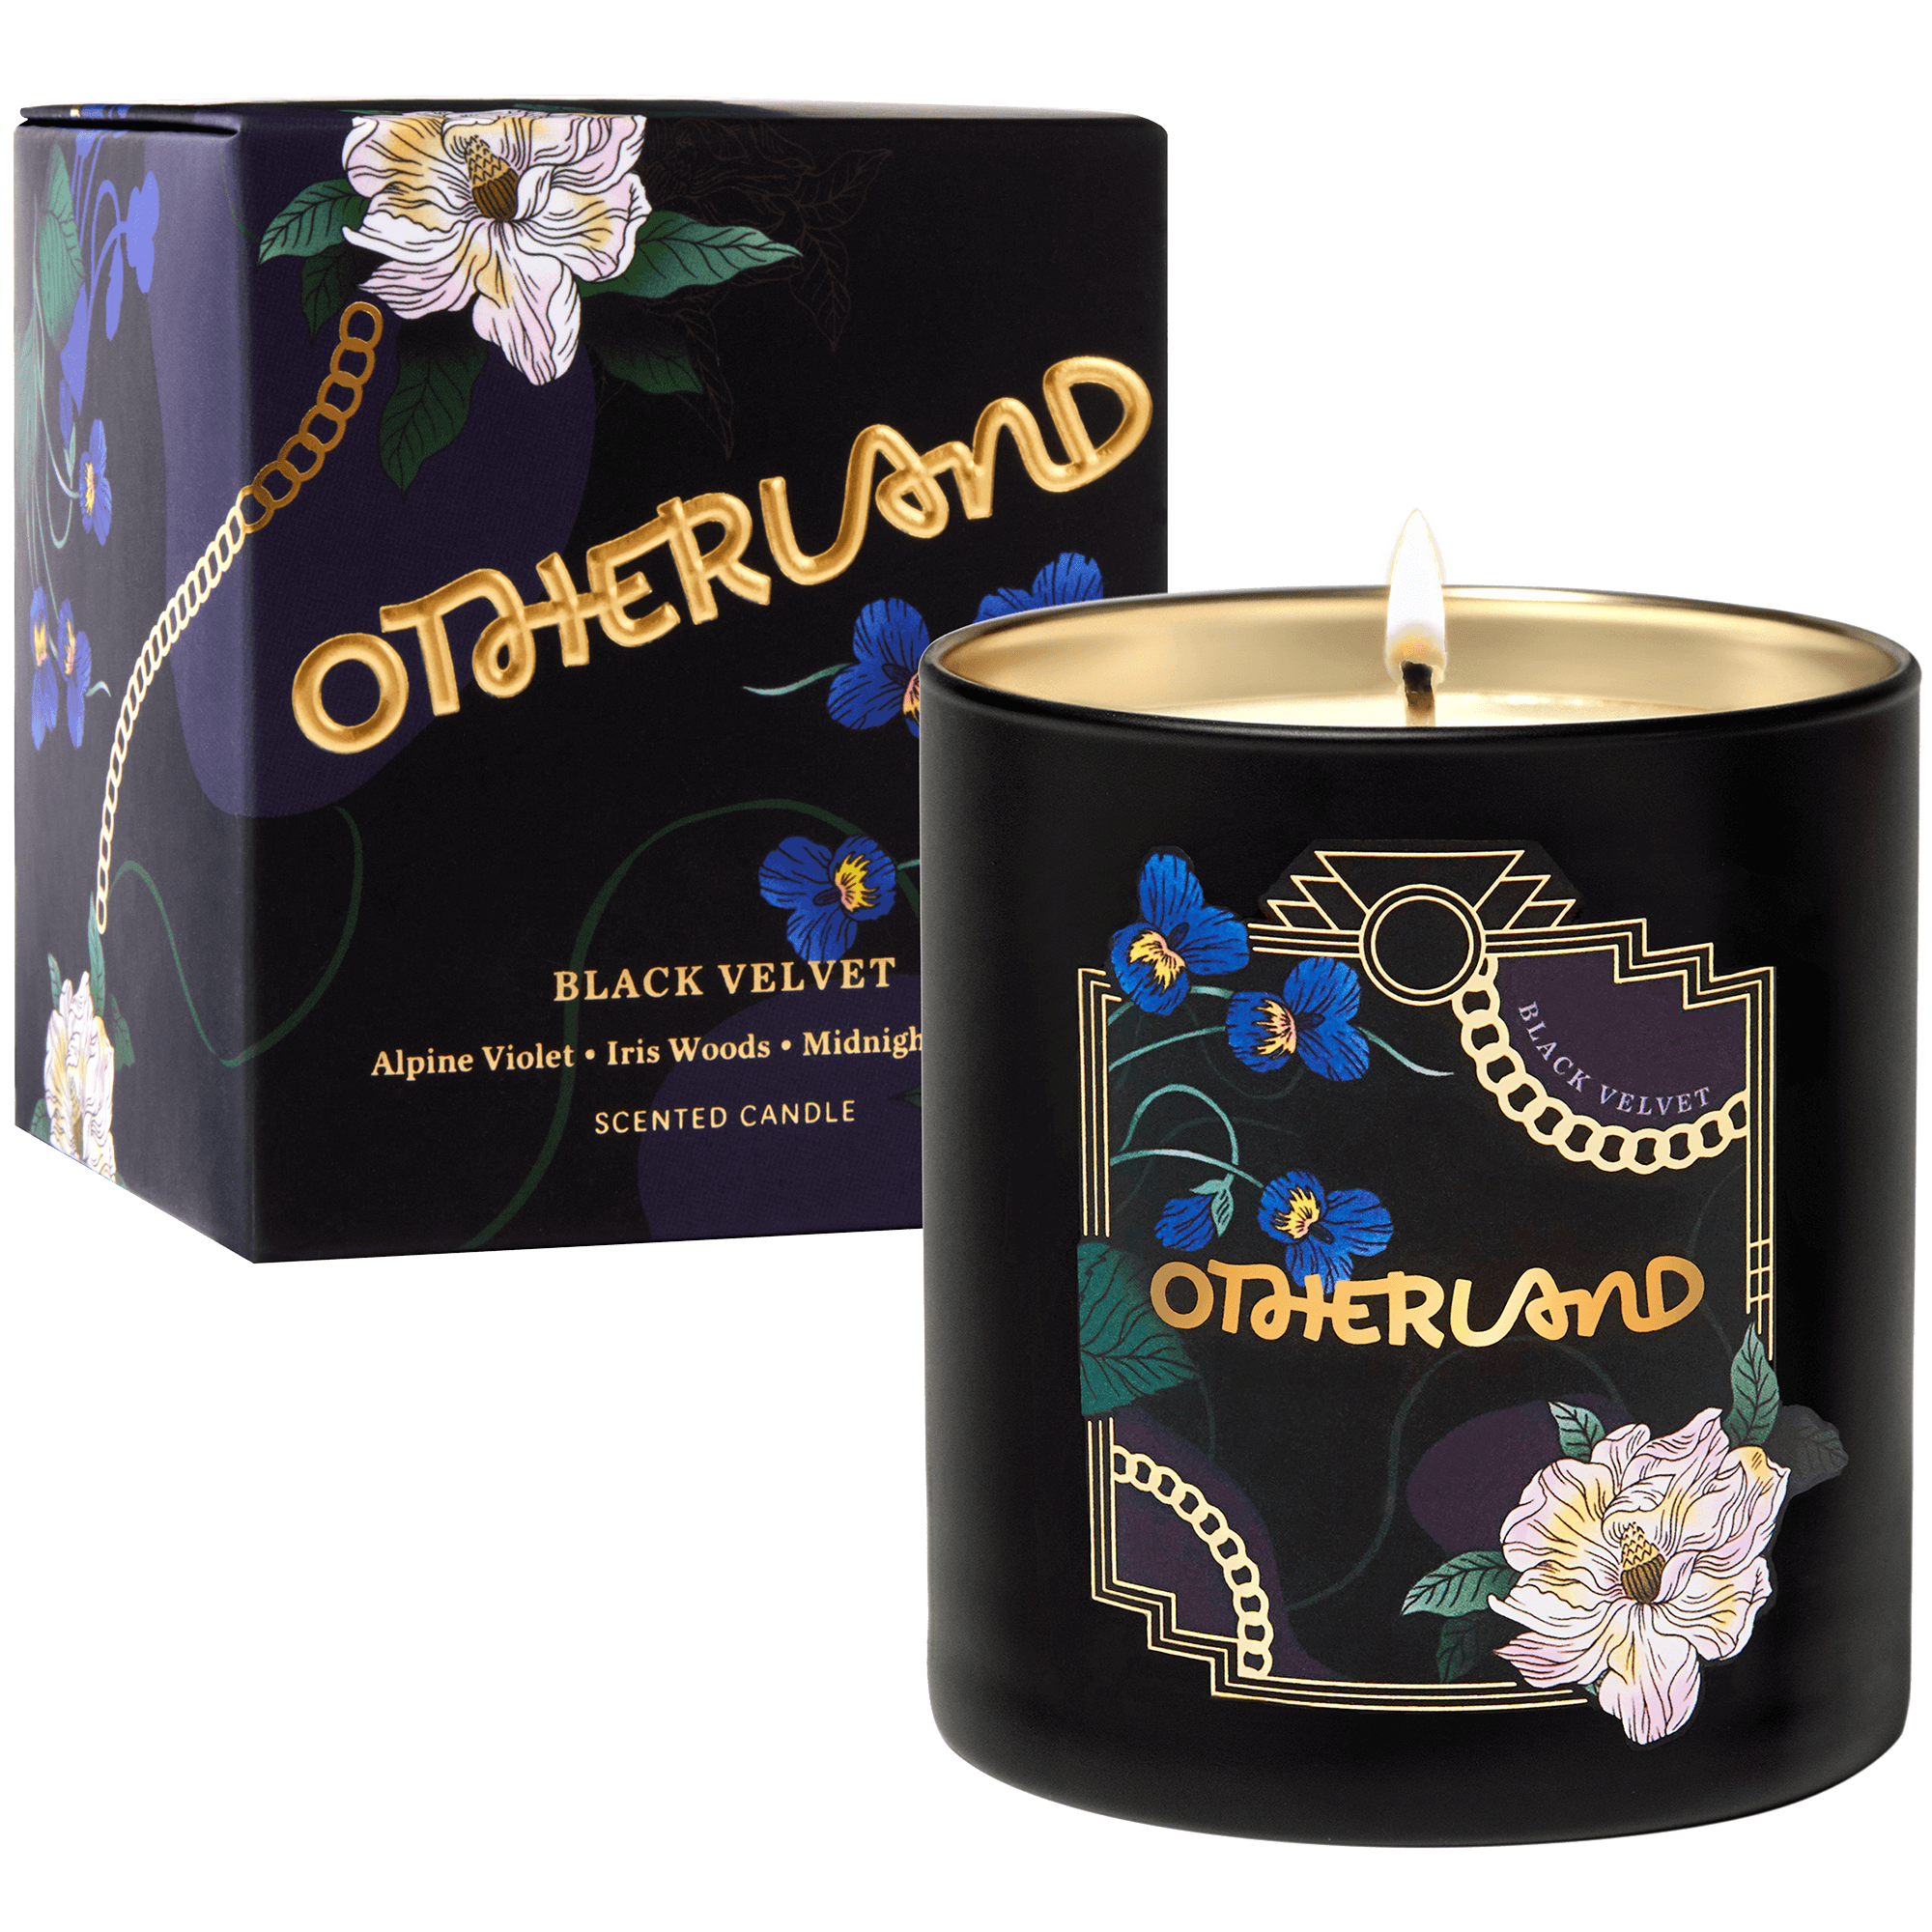 Gilded Collection – Otherland